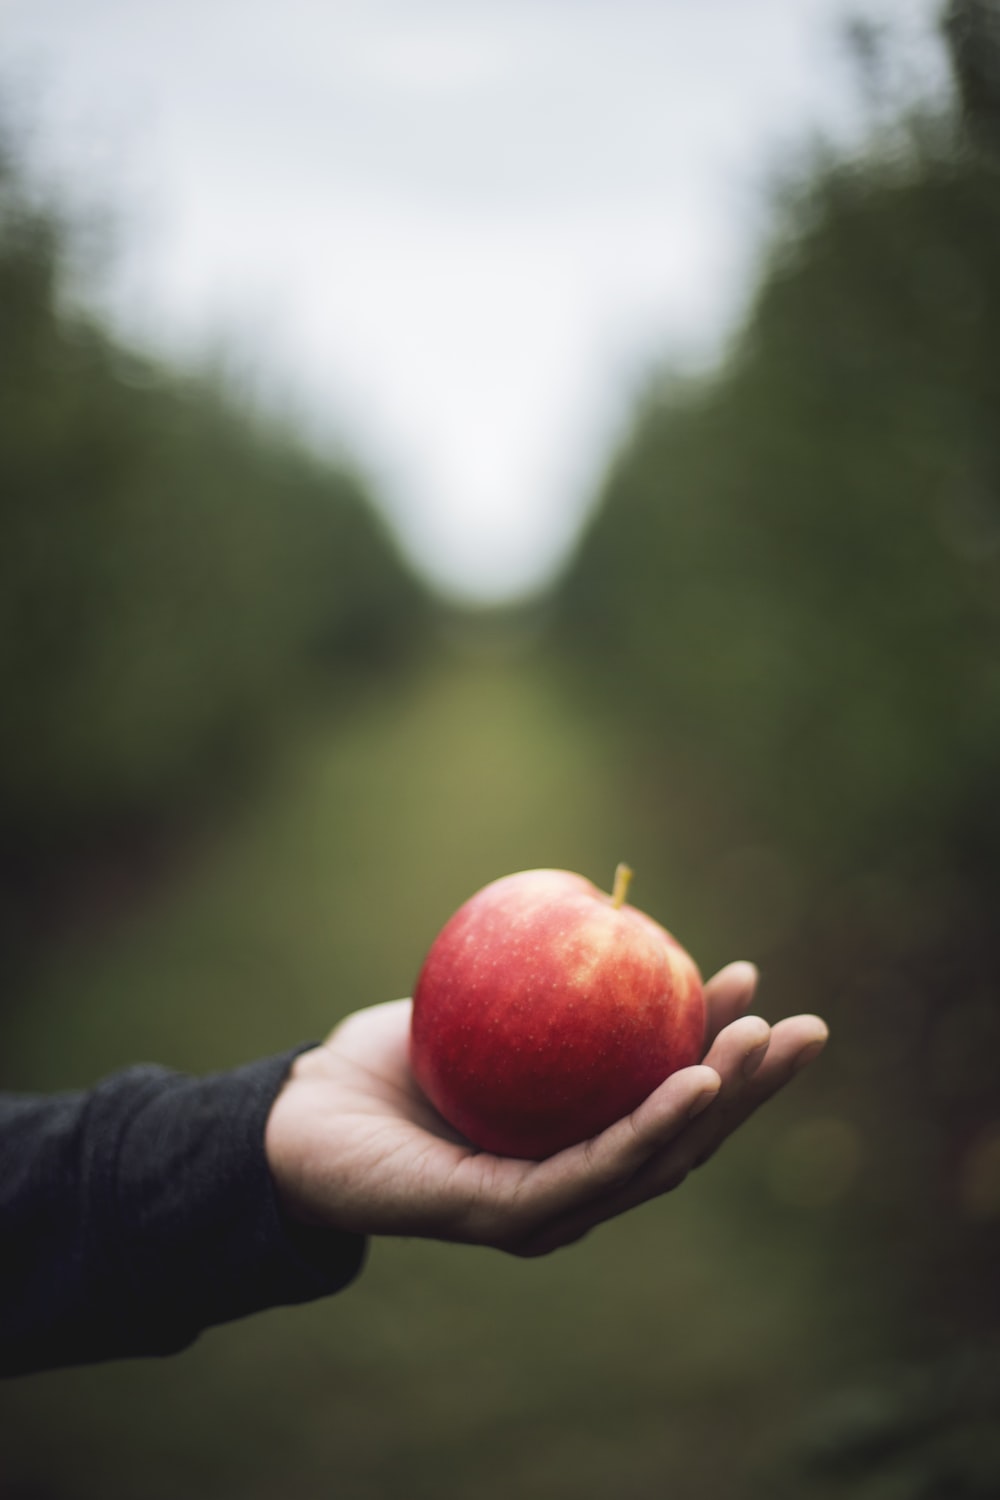 Apple Orchard Picture. Download Free Image